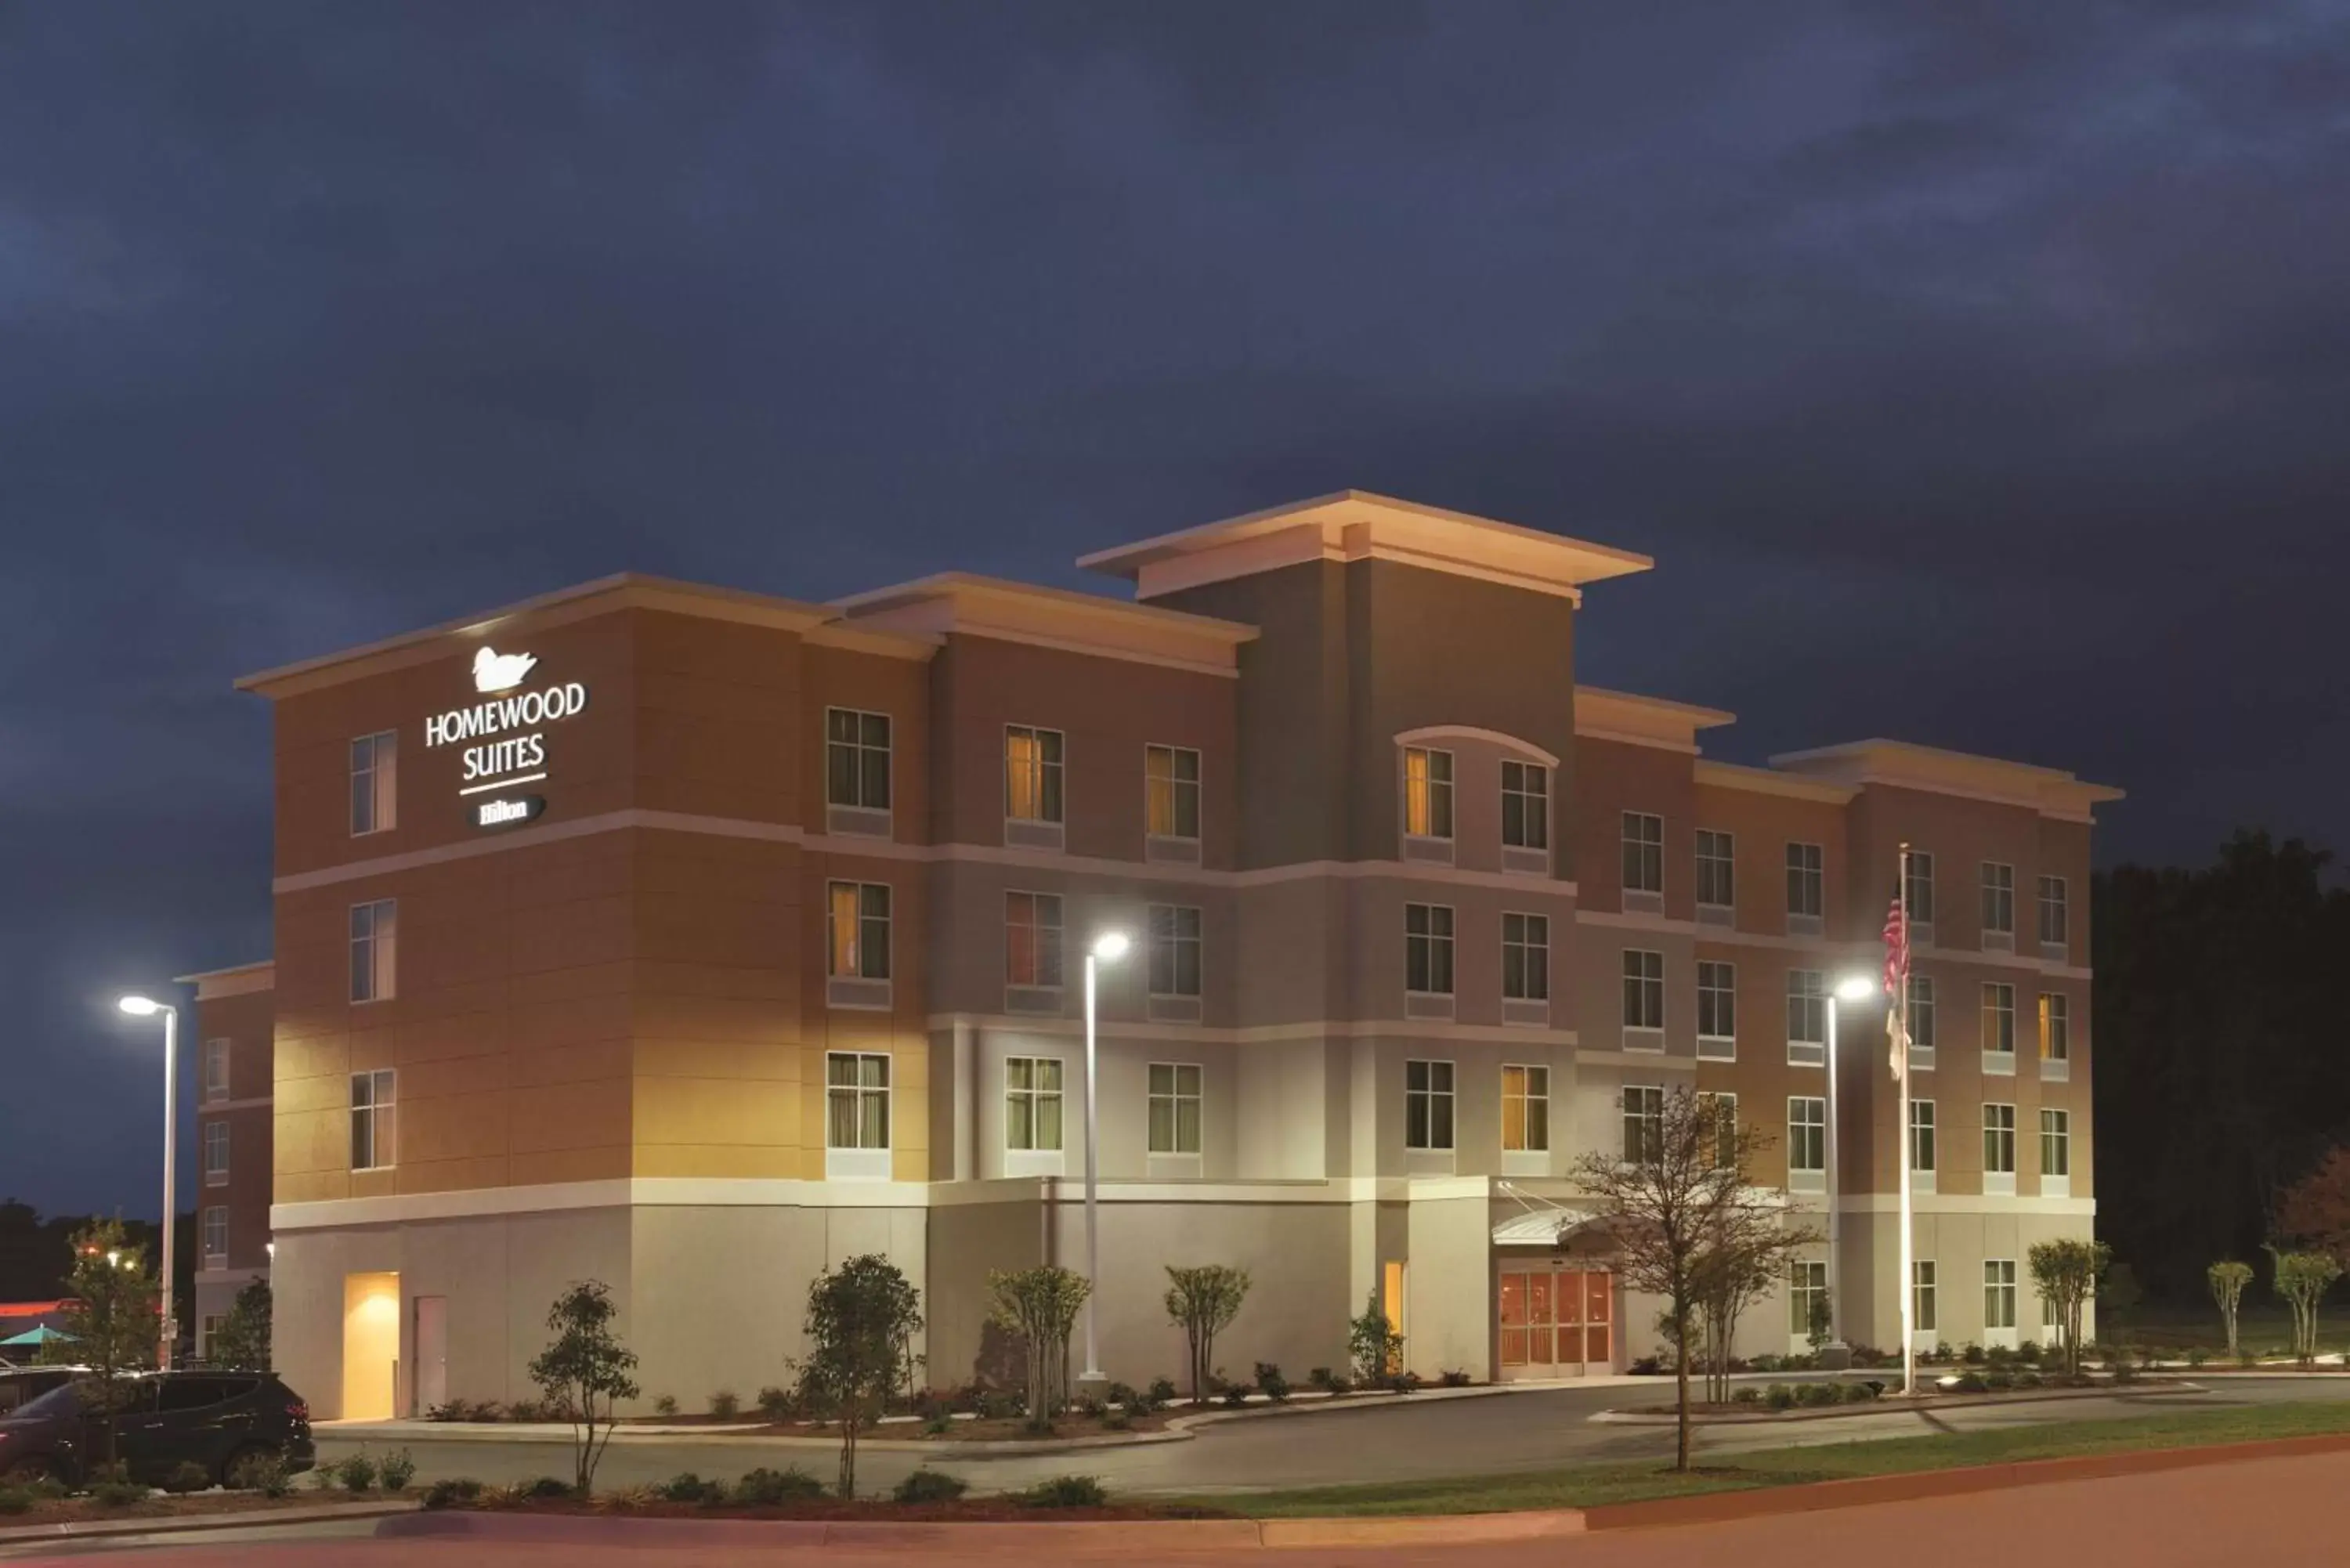 Property Building in Homewood Suites Mobile